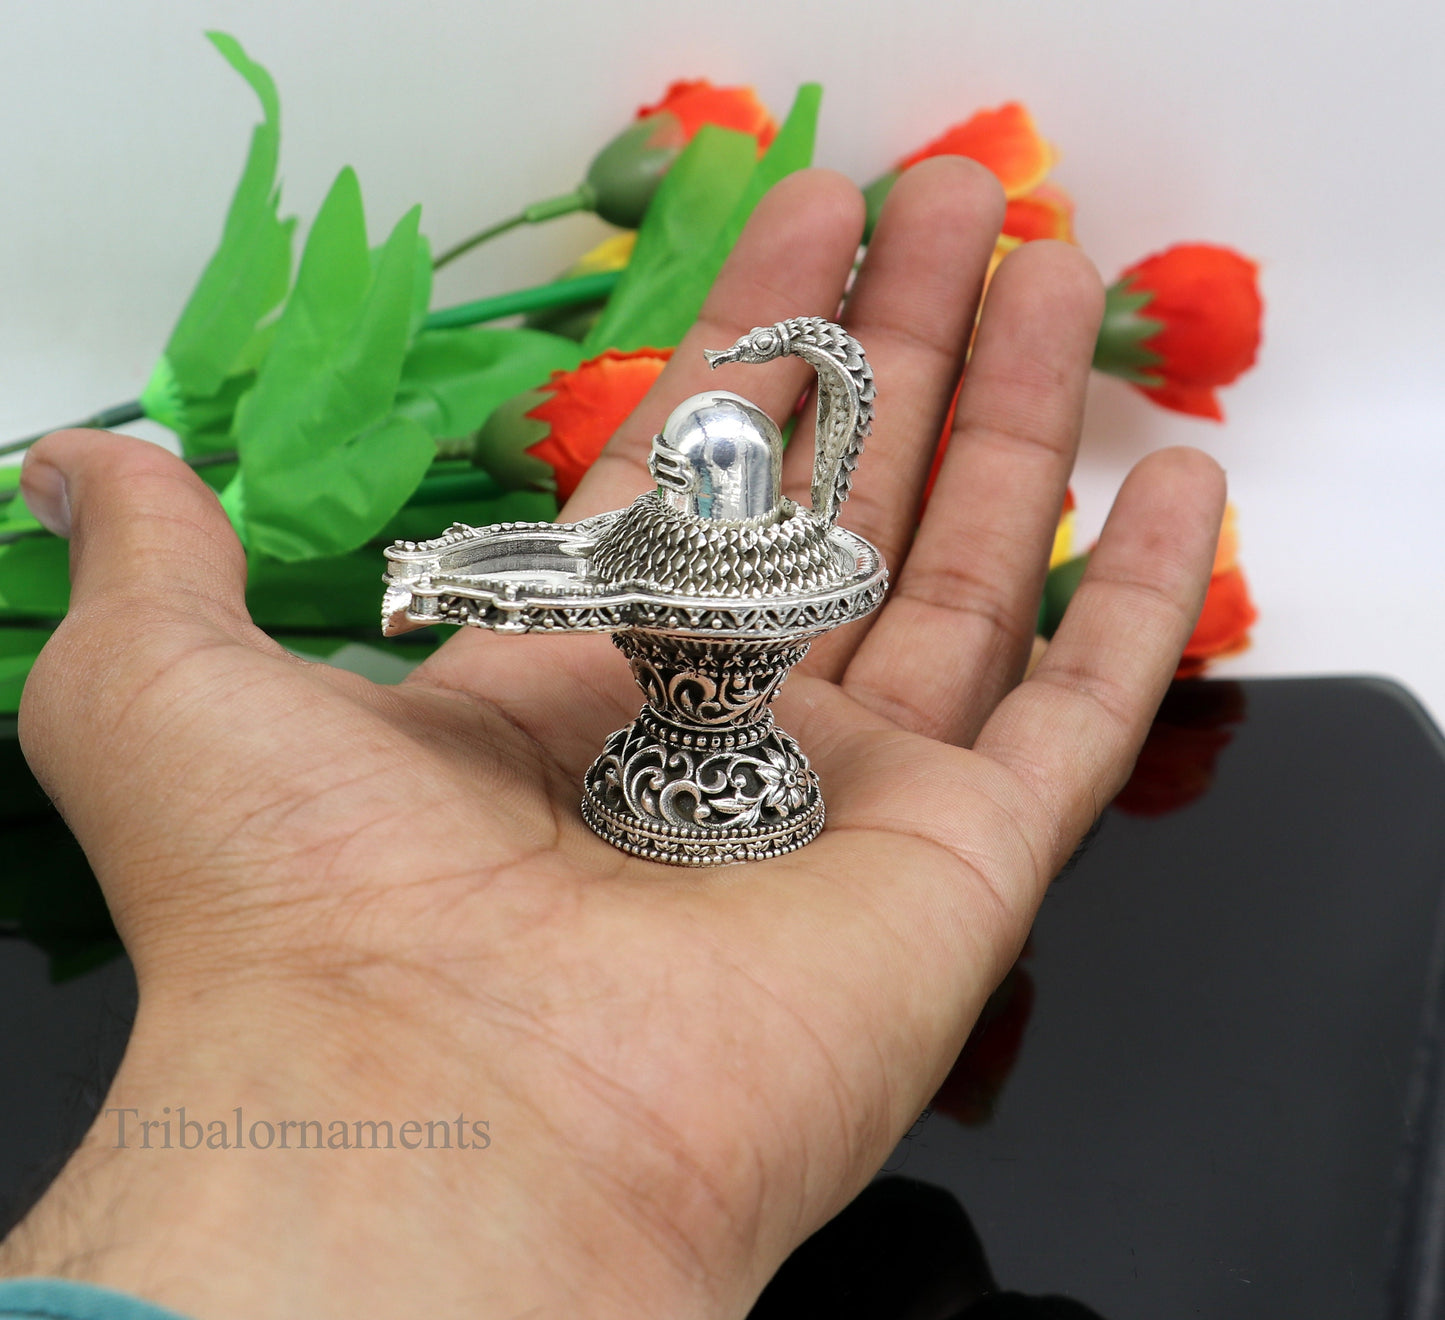 925 fine solid sterling silver lord shiva lingam Jalheri With Snake, Stunning Divine shiva lingam, awesome handmade temple article su481 - TRIBAL ORNAMENTS